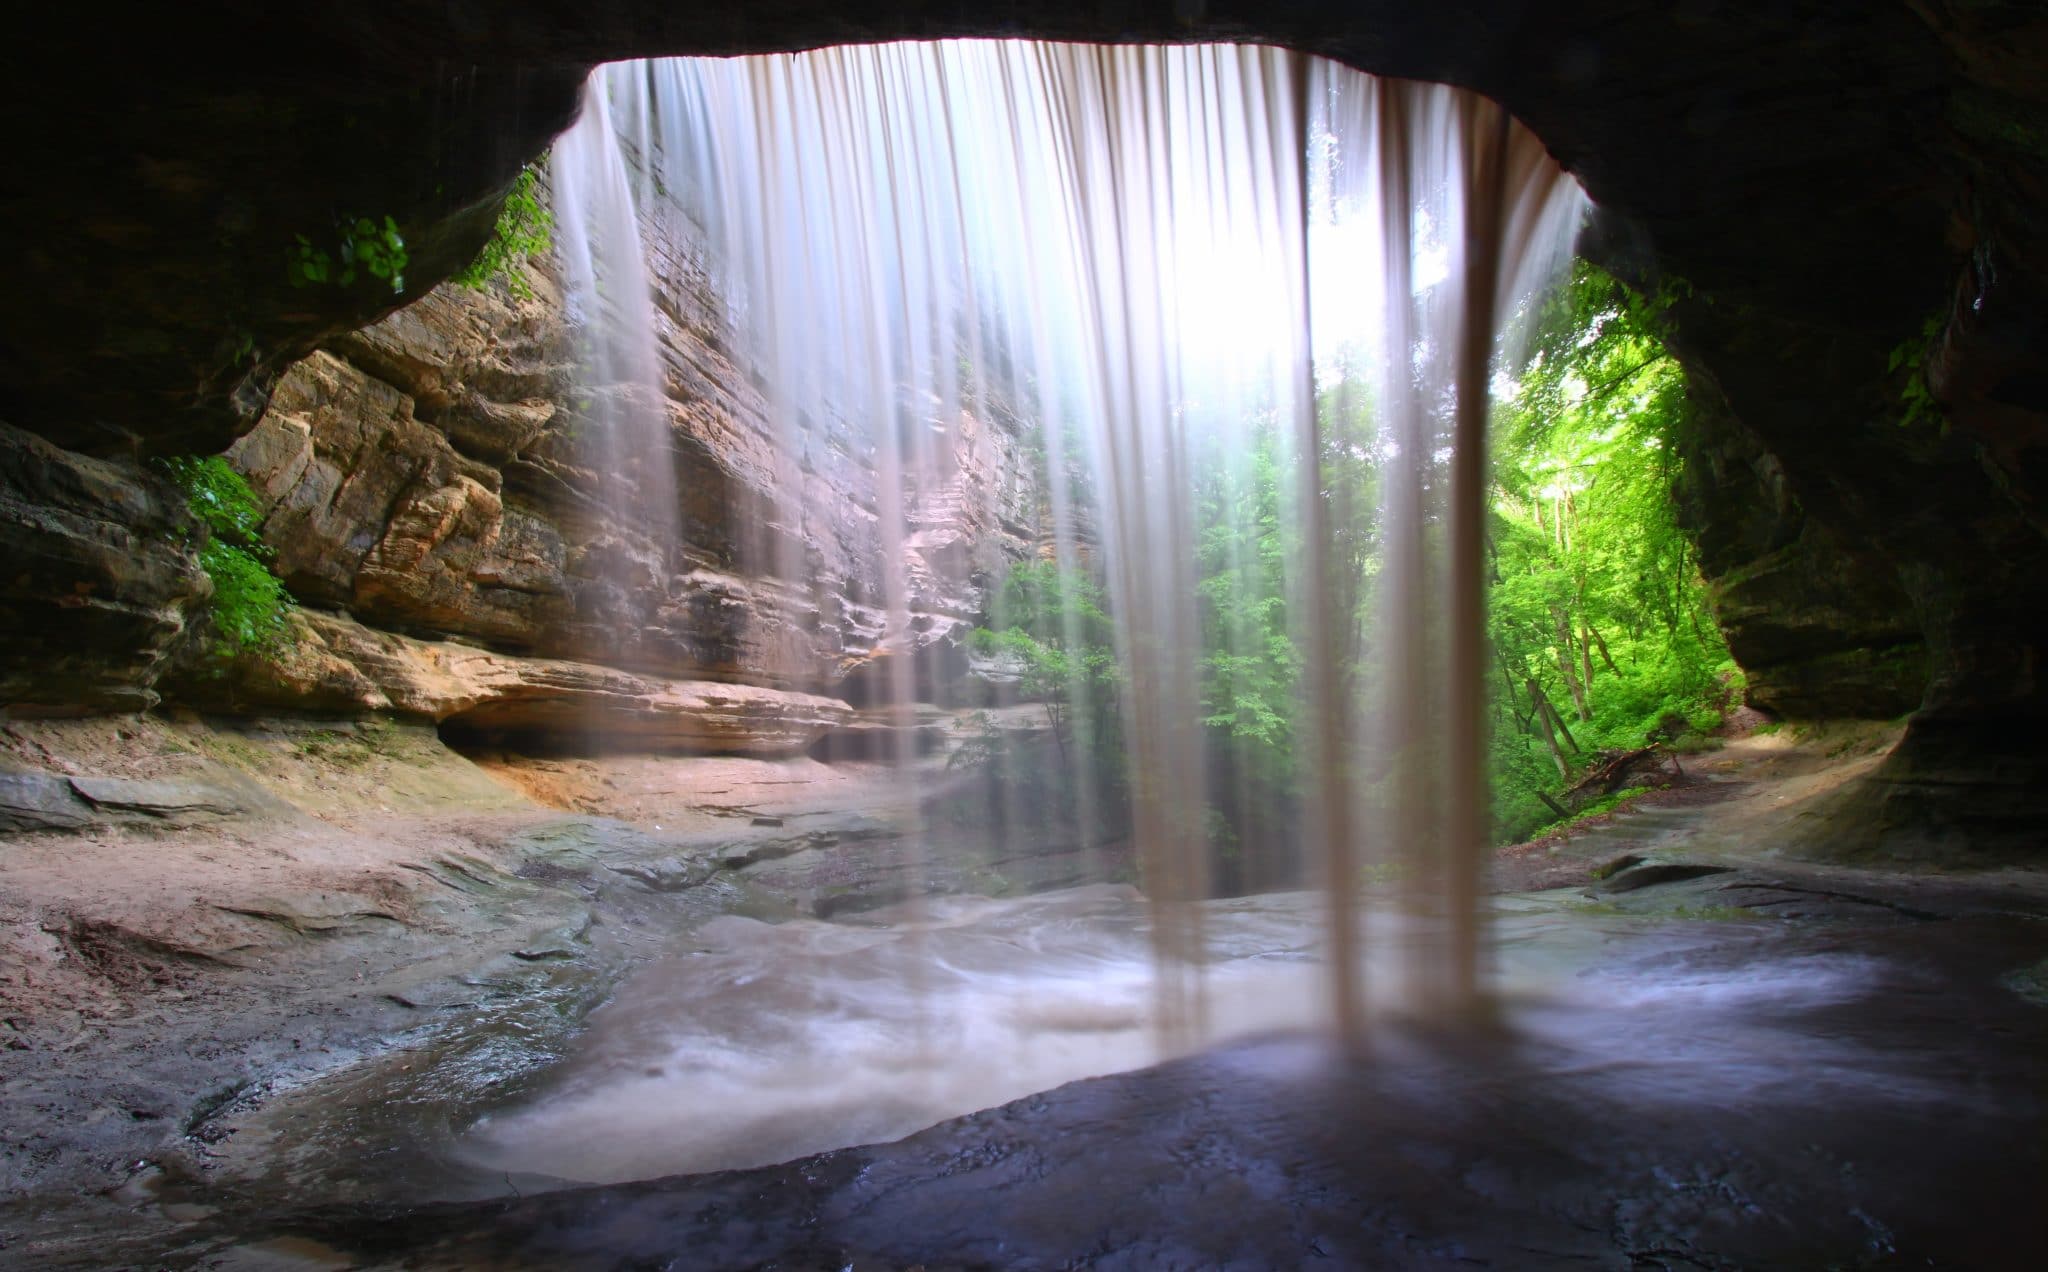 Image of the LaSalle Canyon Falls near Chicago located in Starved Rock State Park